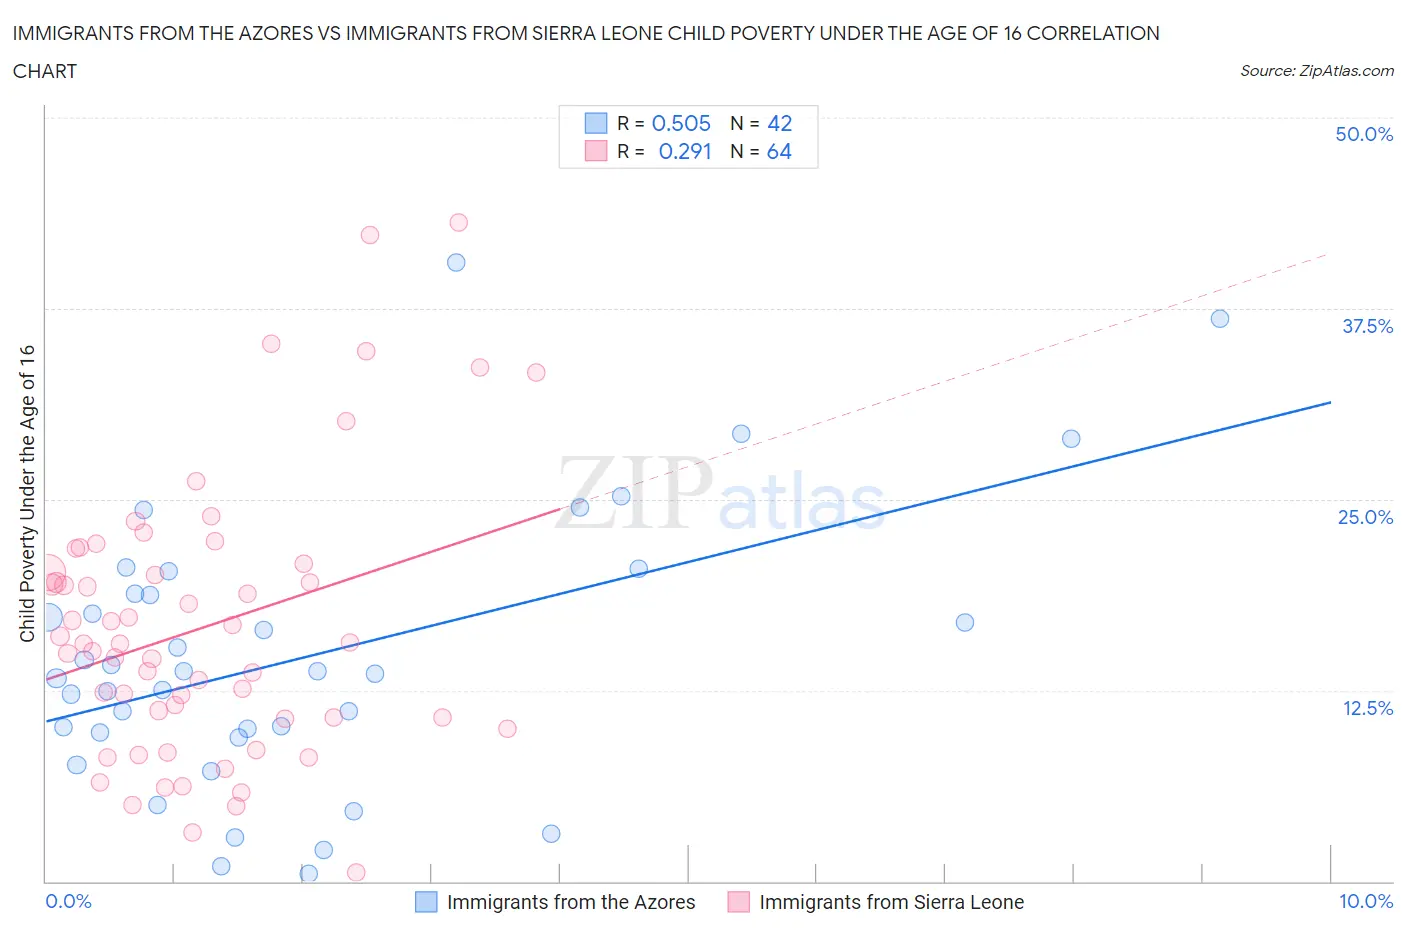 Immigrants from the Azores vs Immigrants from Sierra Leone Child Poverty Under the Age of 16